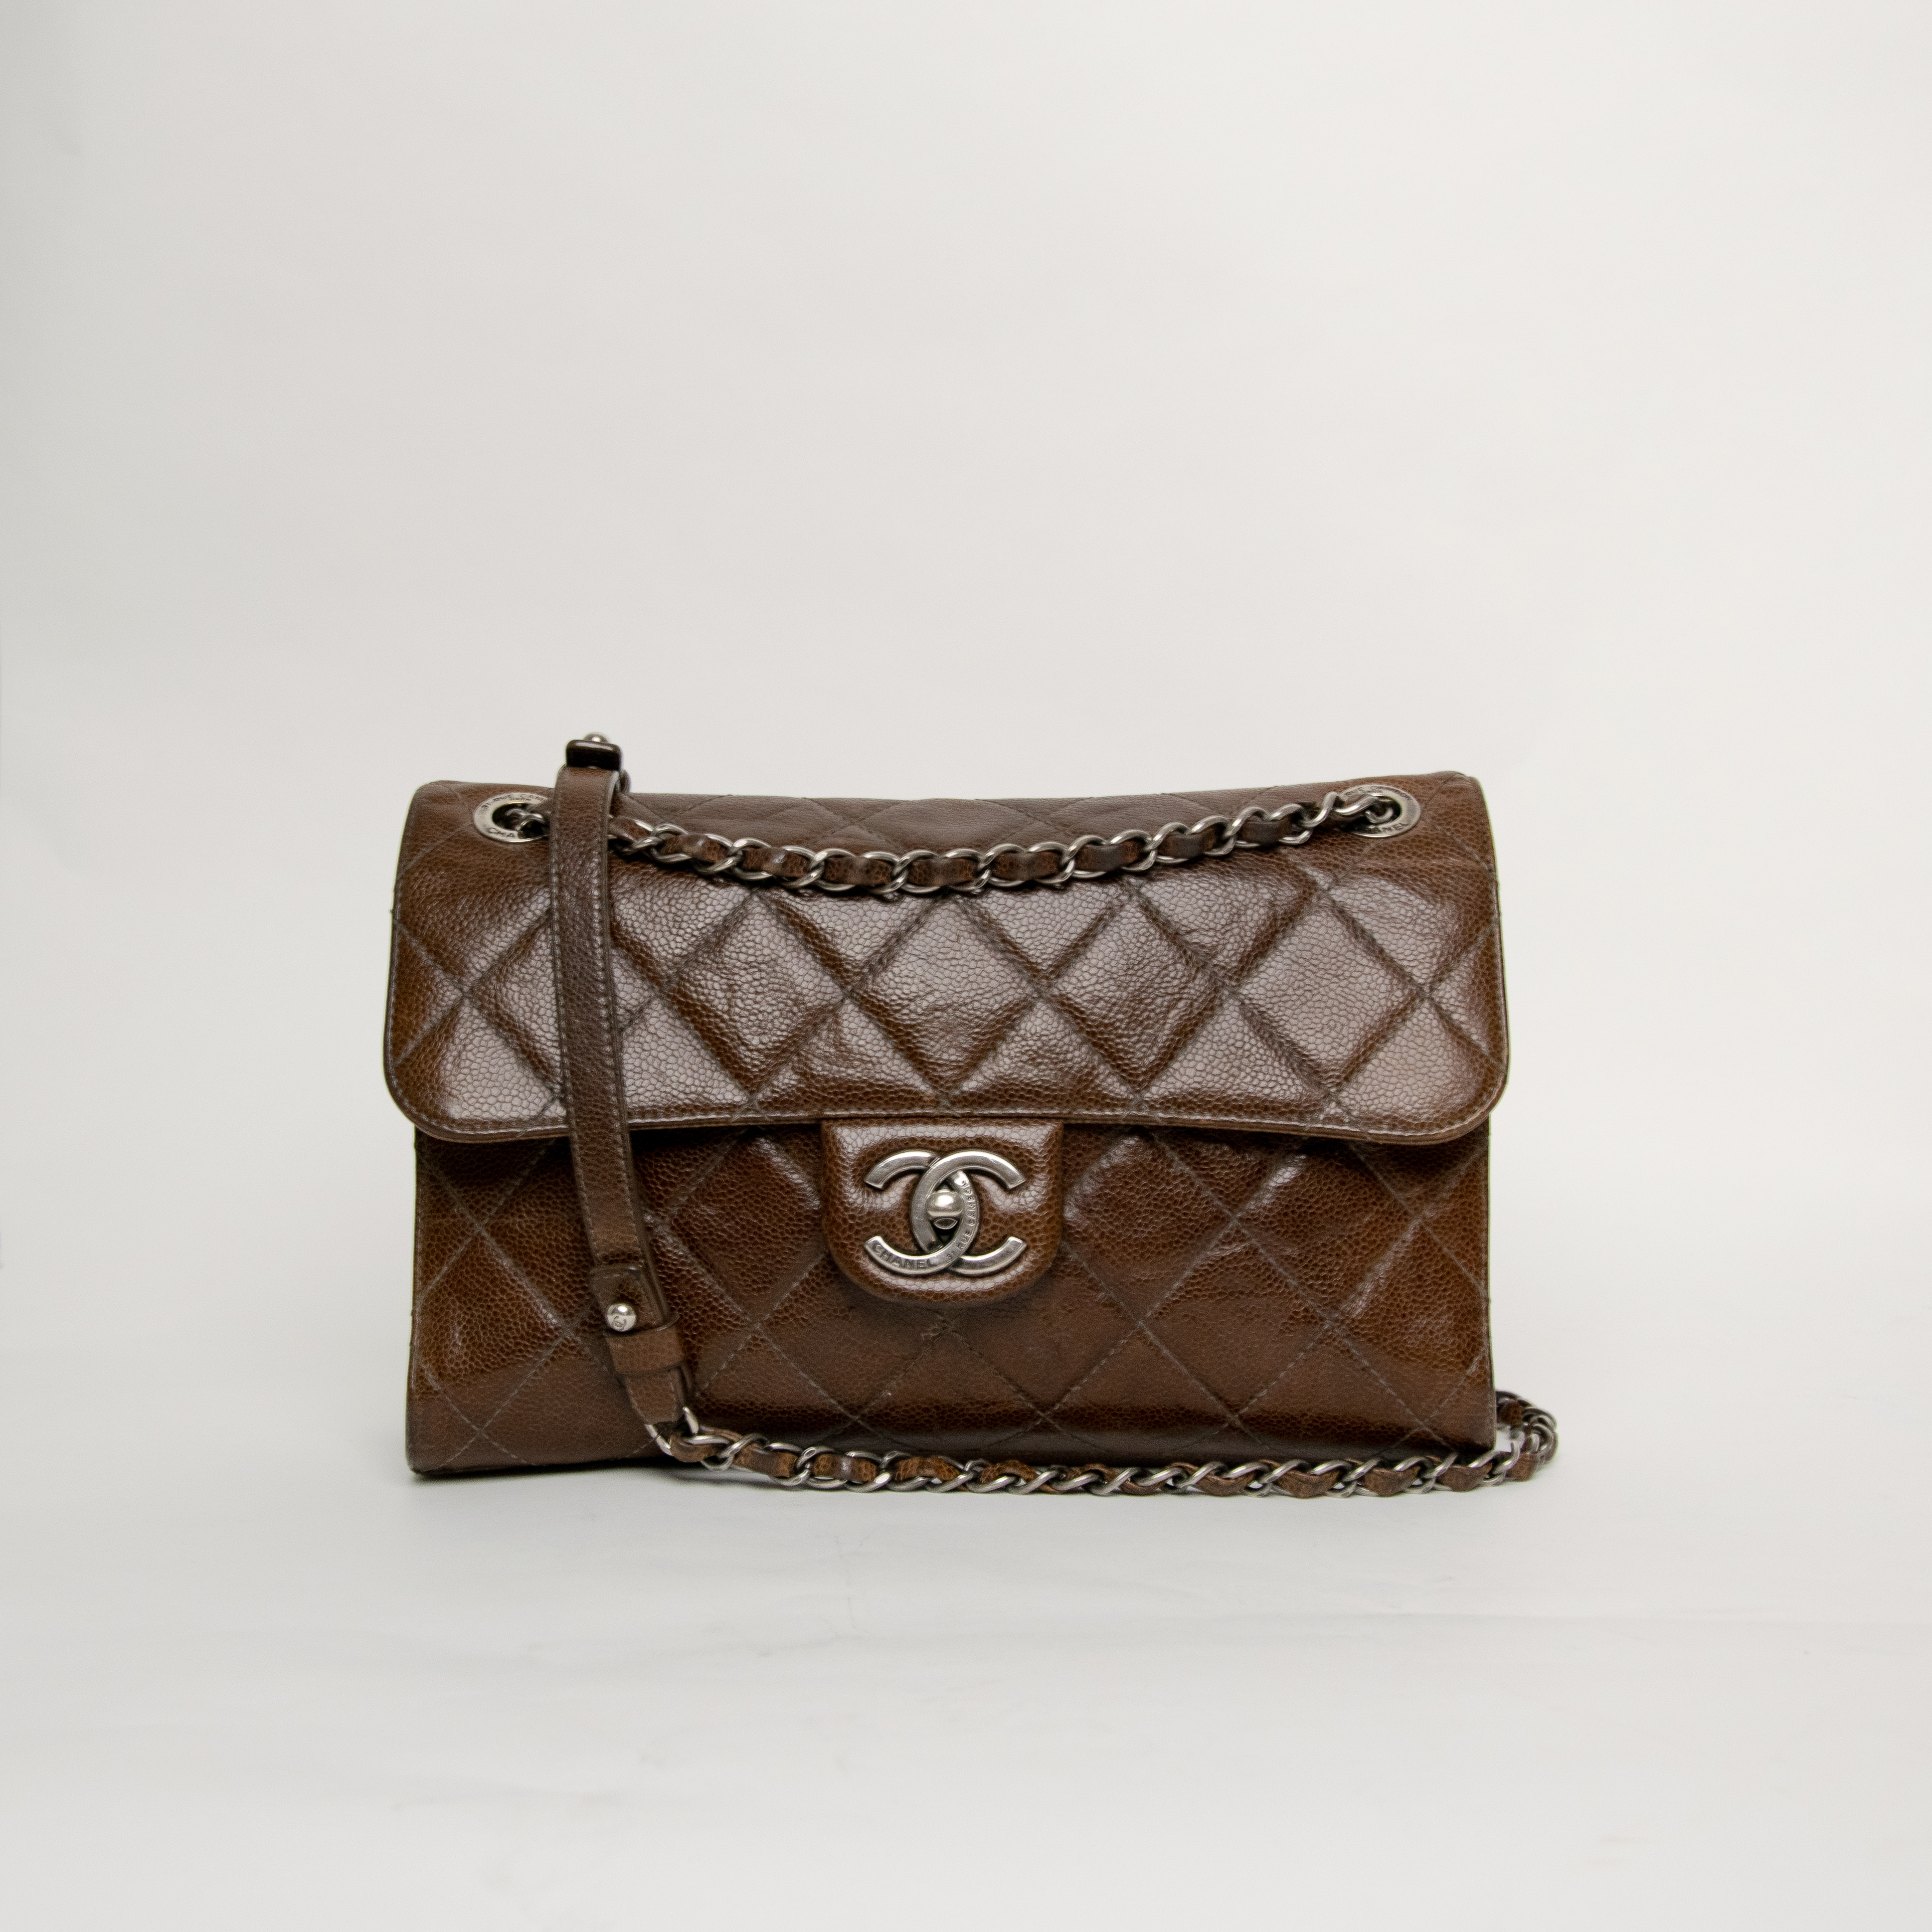 Chanel Single Flap Bag Caviar Brown with aged silver hardware